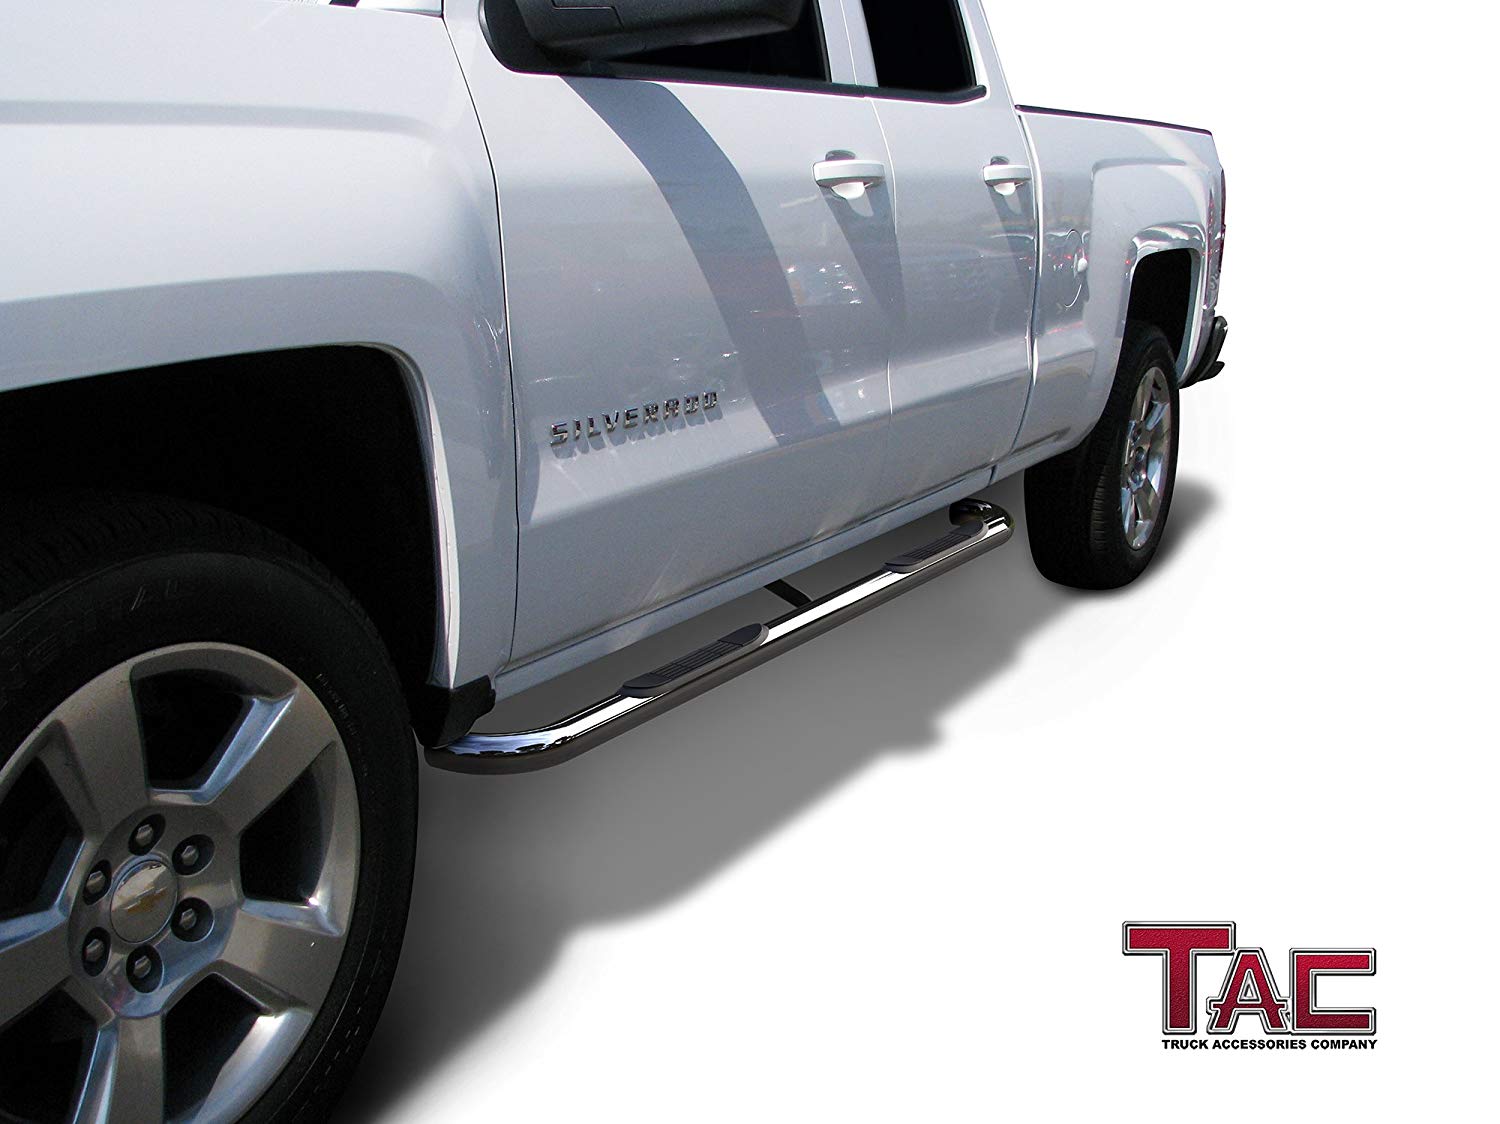 TAC Stainless Steel 3" Side Steps For Chevy Silverado/GMC Sierra 1999-2019 1500 Models & 1999-2019 2500/3500 Models Extended/Double Cab (Excl. C/K Classic) Truck (Body Mount) | Running Boards | Nerf Bars | Side Bars - 0